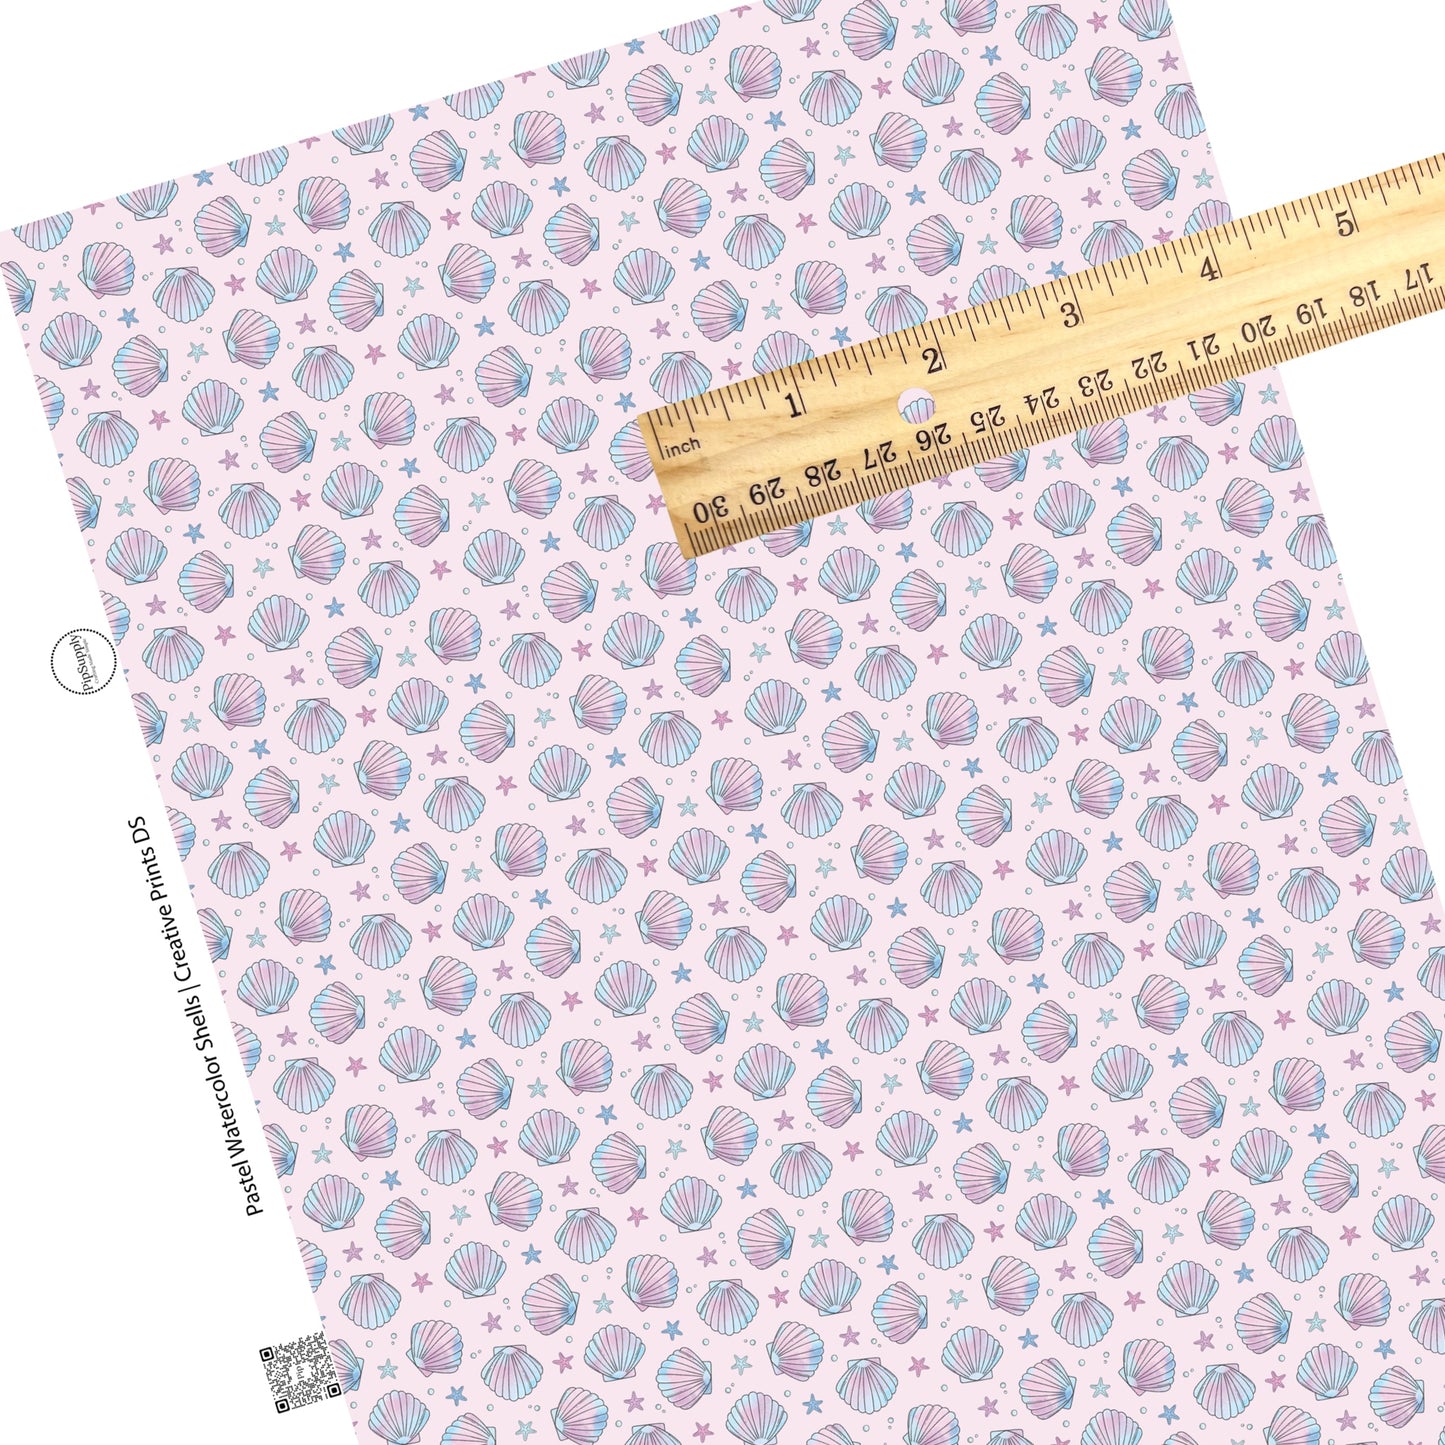 These pastel faux leather sheets contain the following design elements: watercolor pink and purple sea shells. Our CPSIA compliant faux leather sheets or rolls can be used for all types of crafting projects.